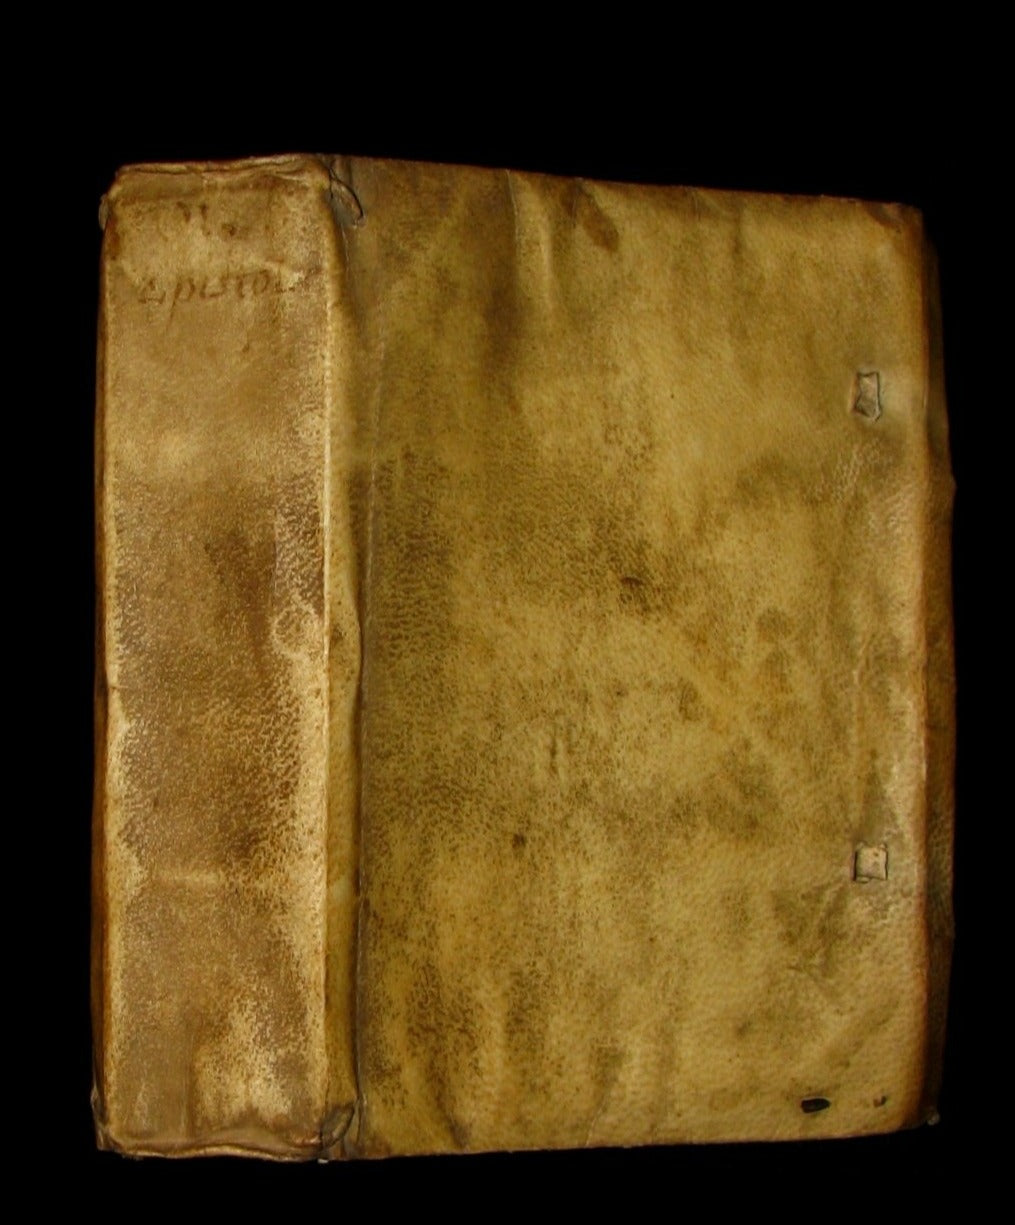 1623 Scarce Latin vellum Book ~ OVID's Heroines, Art of Love and Remedies for Love.